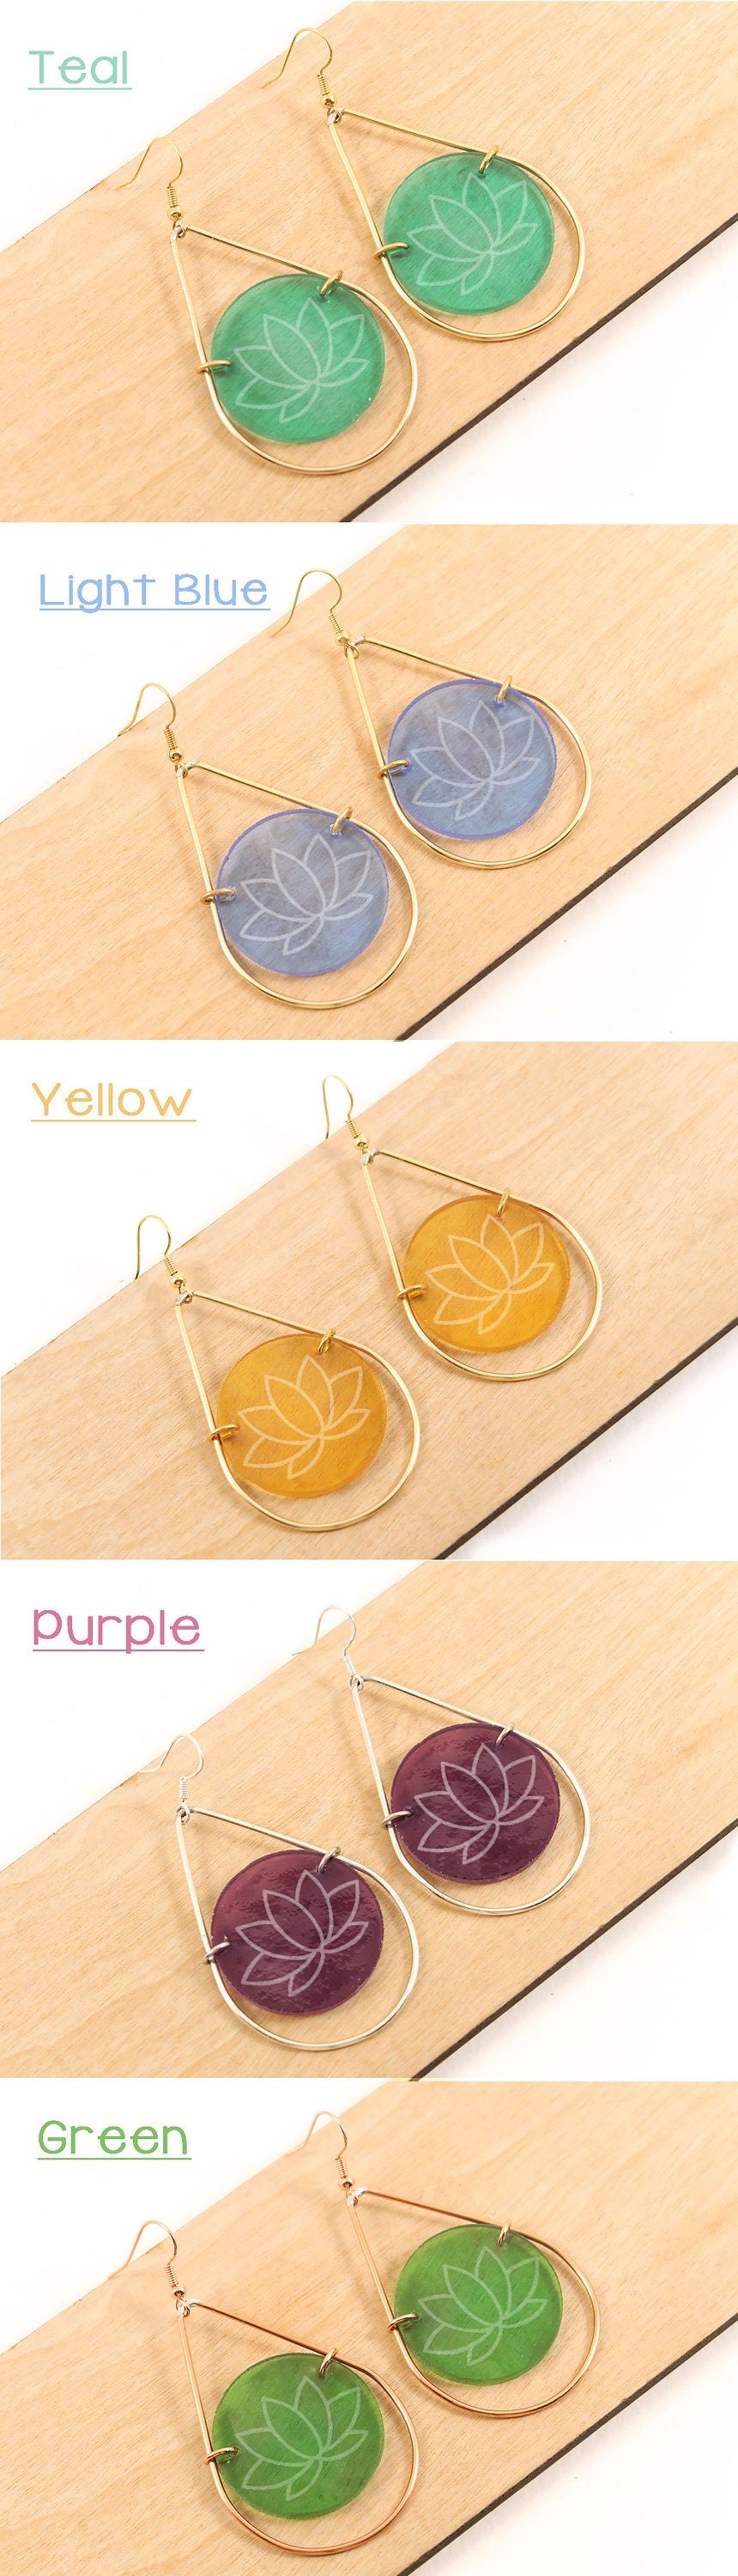 Lotus Etched Stained Glass Teardrop Earrings